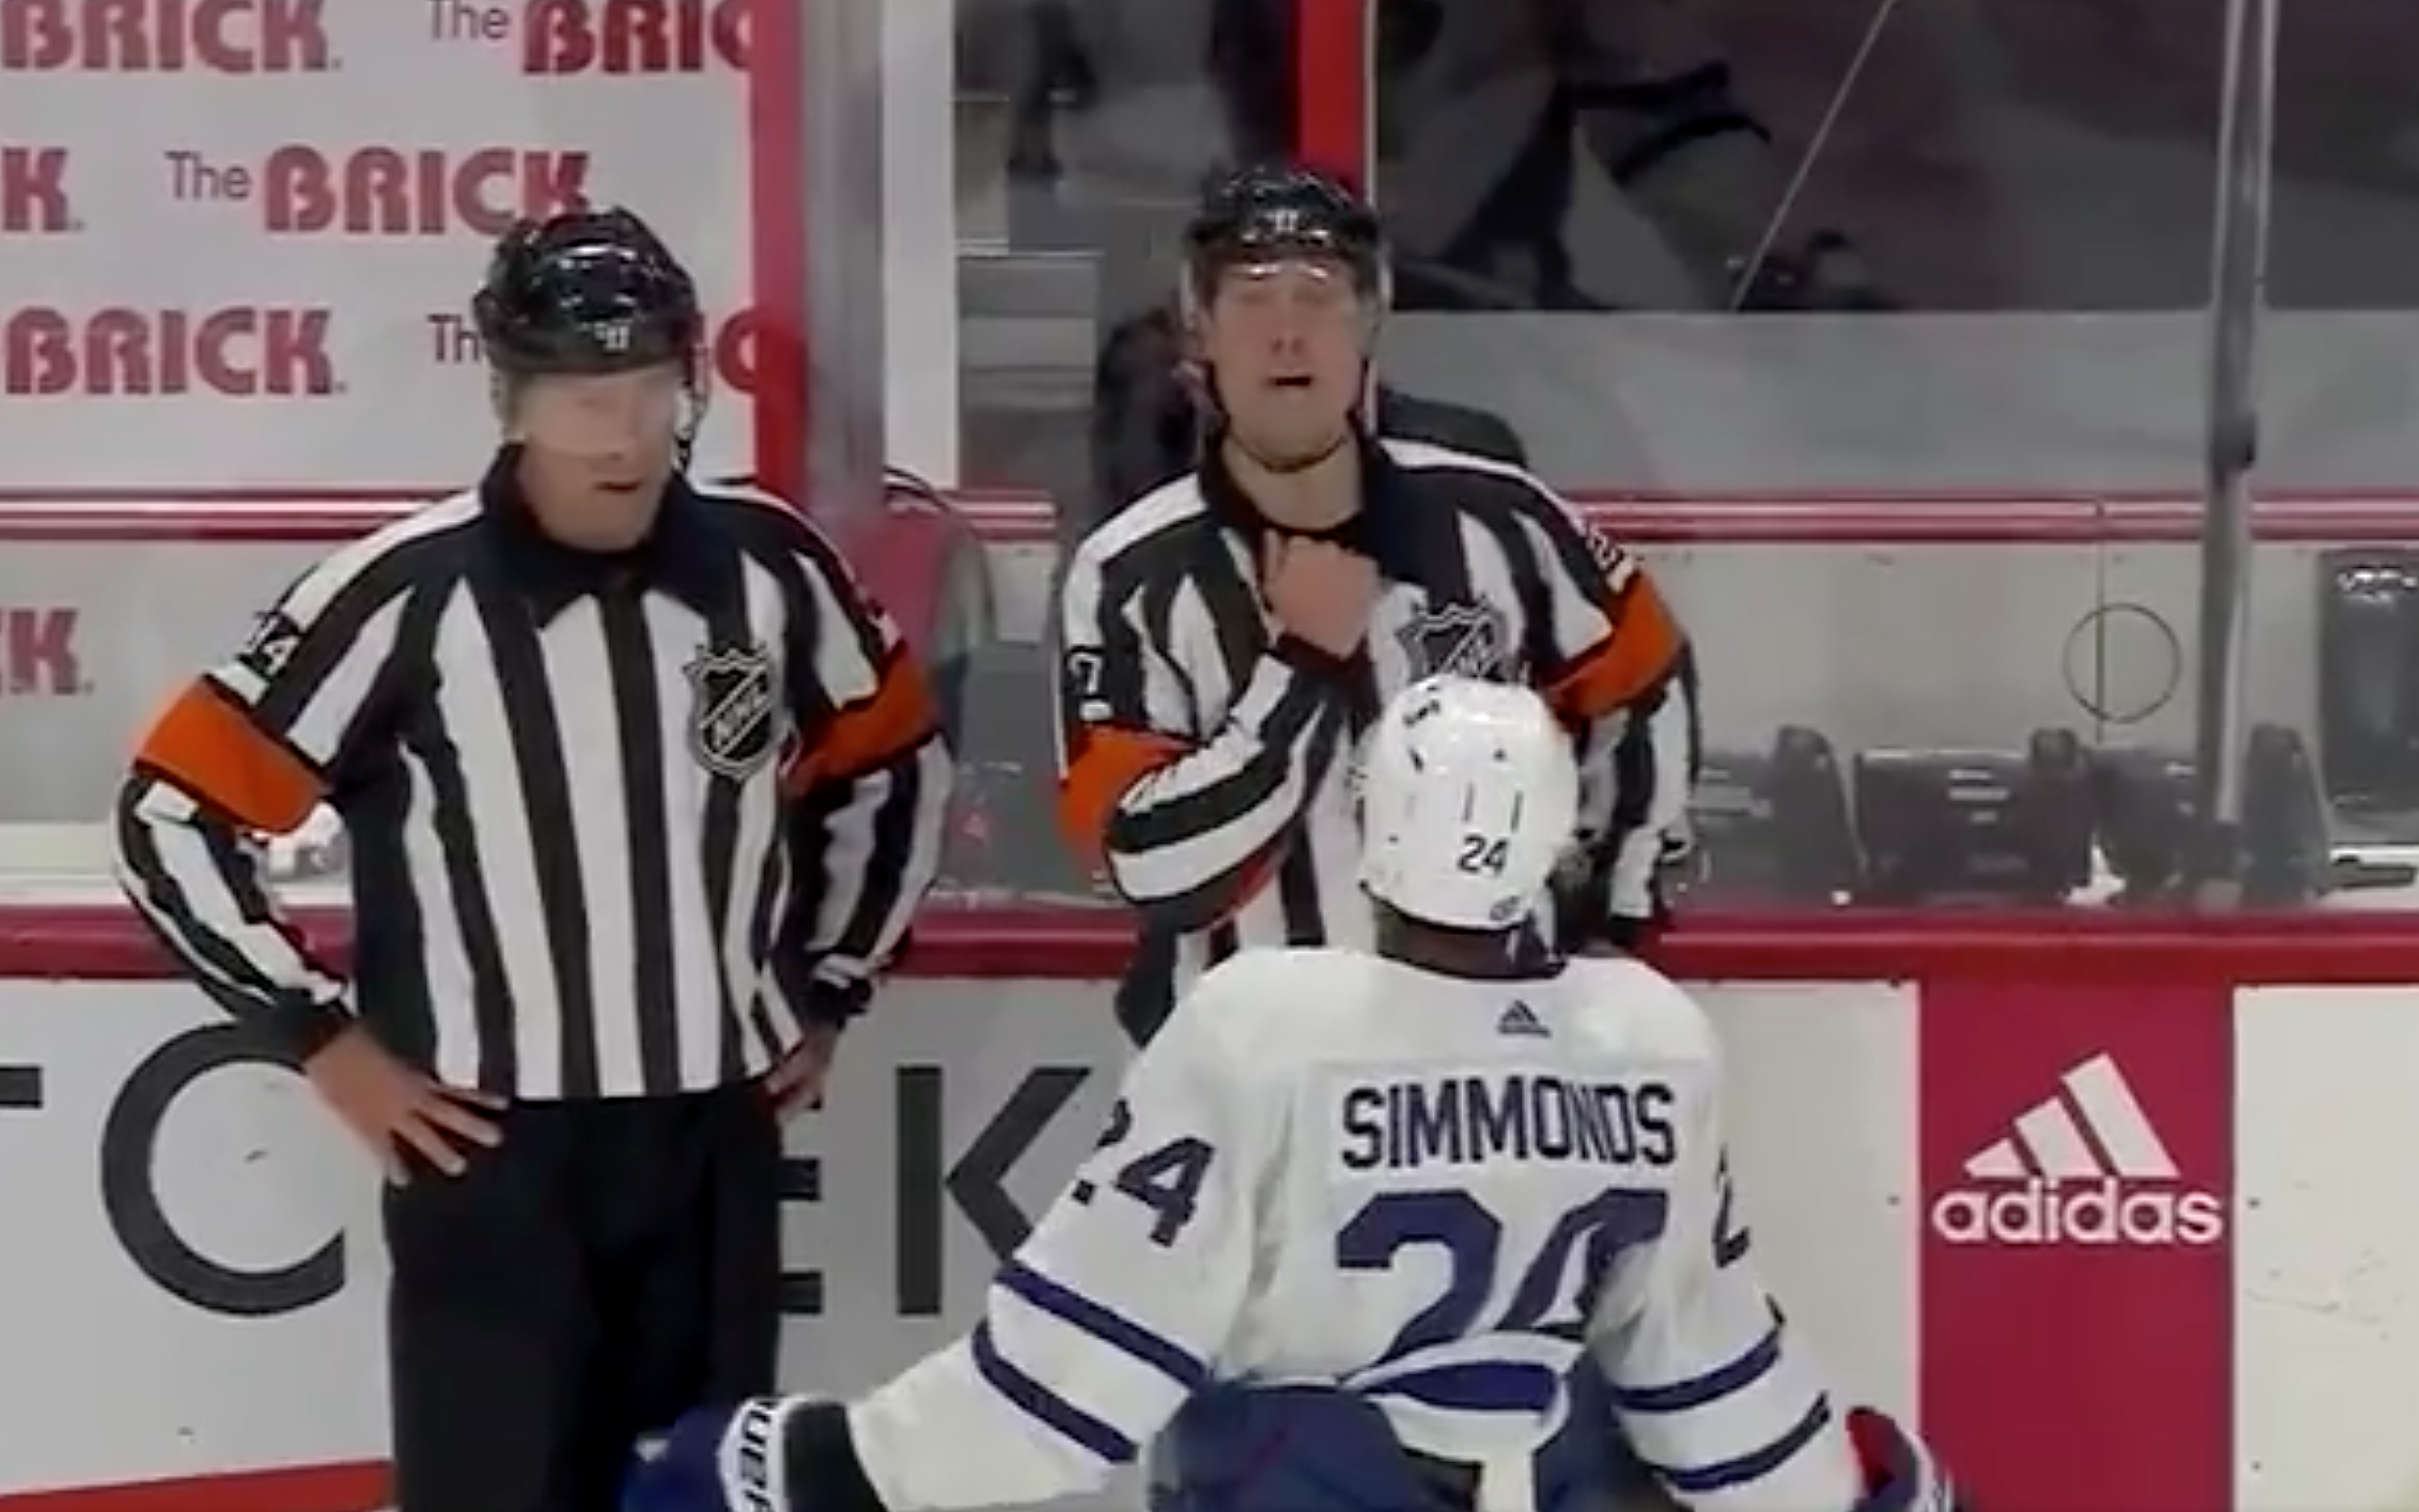 Should the NHL make referees give postgame interviews?